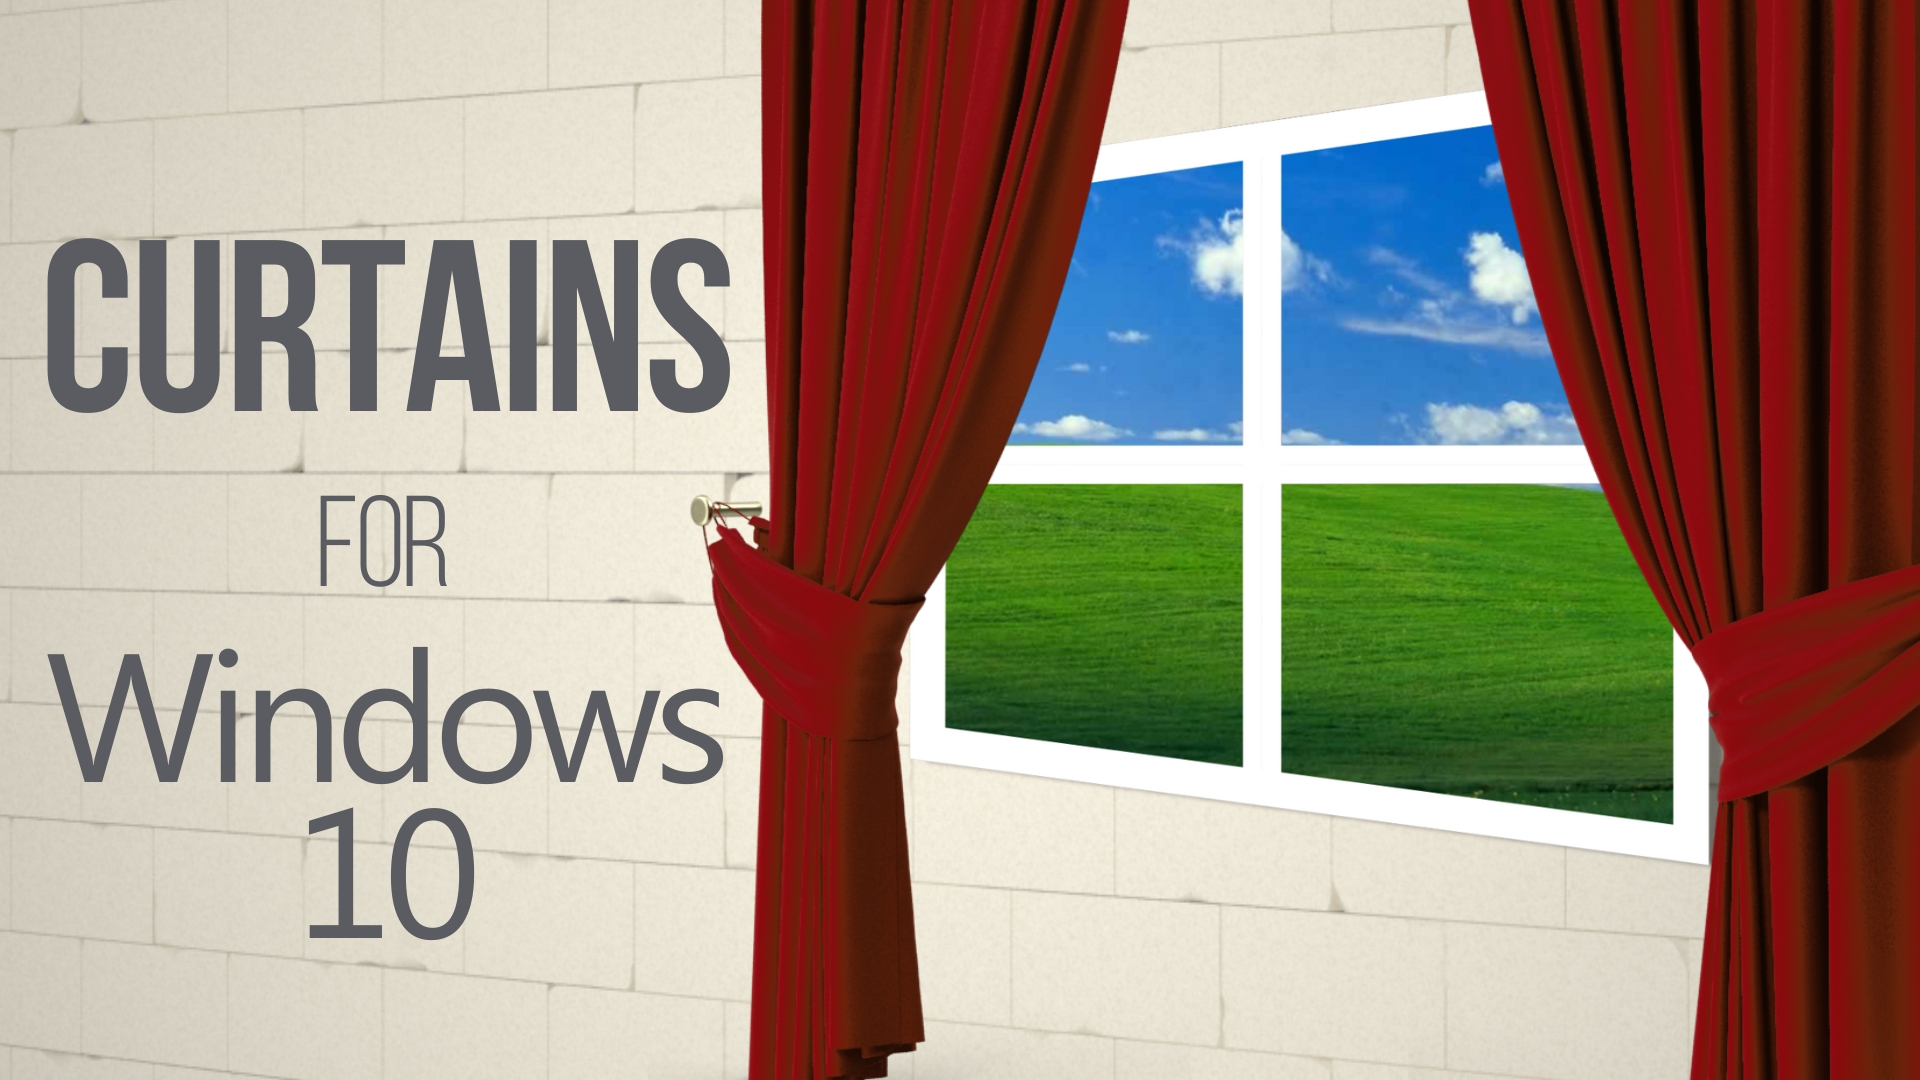 Windows 10 takes its final bow